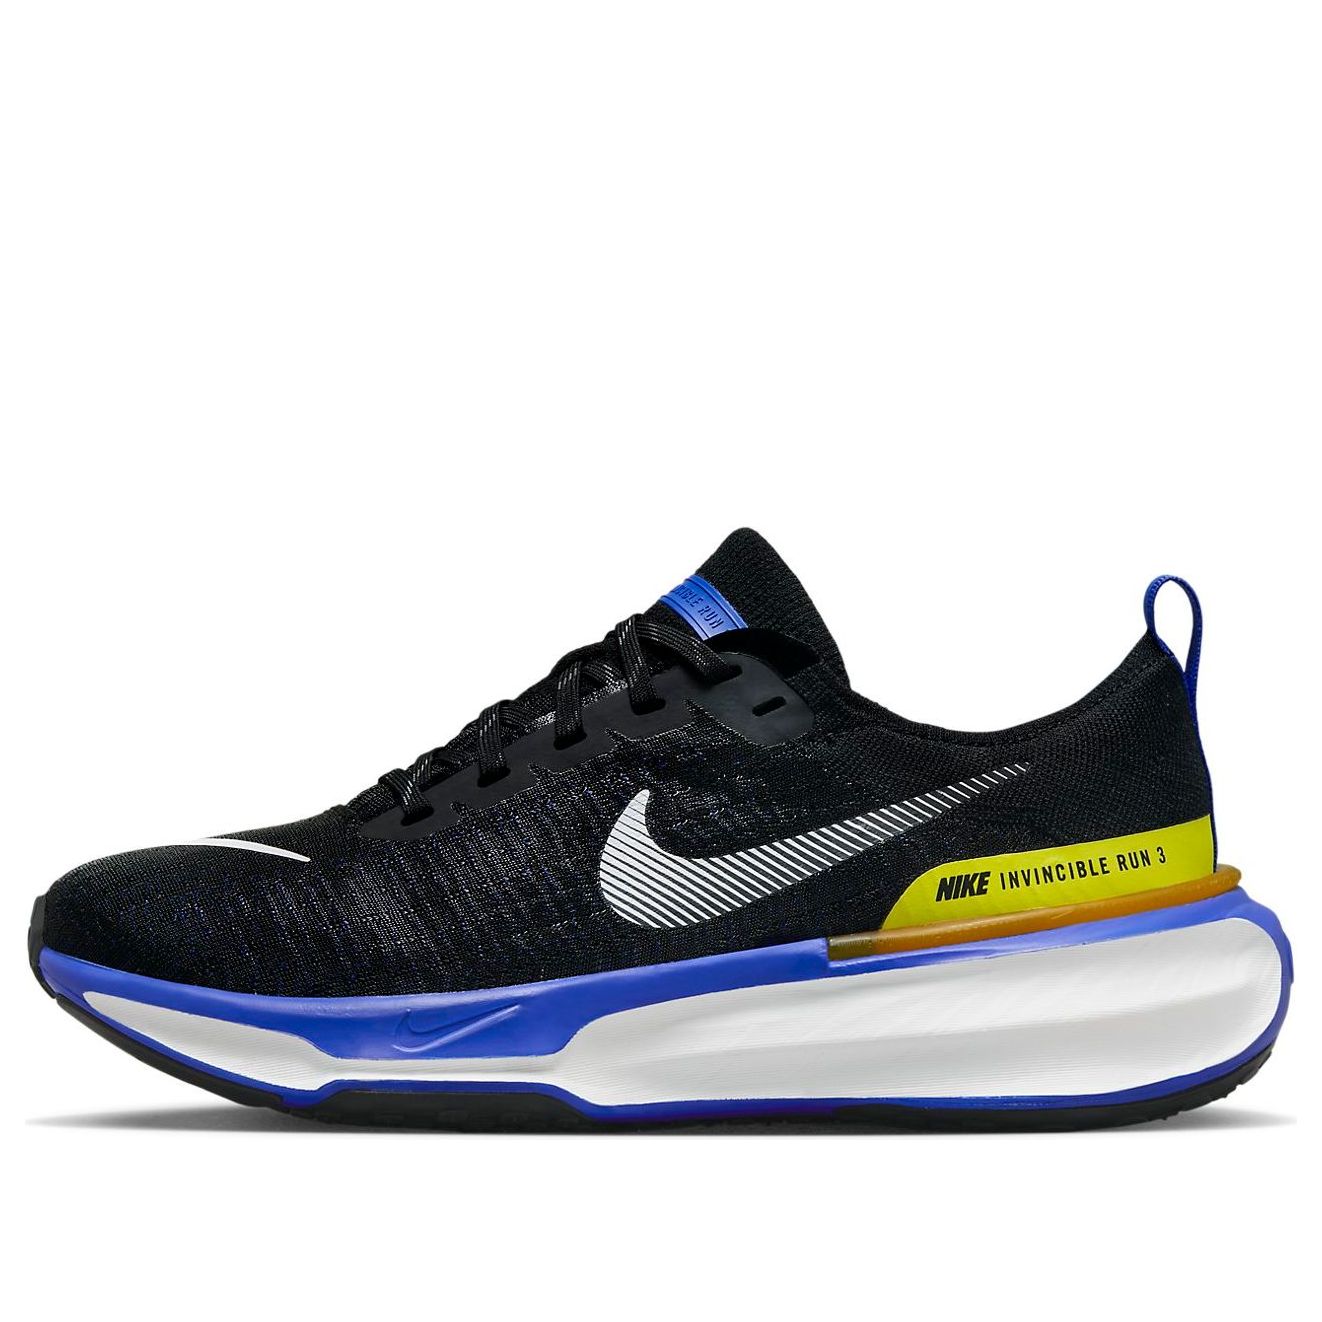 Nike ZoomX Invincible Run Flyknit 3 'Black Racer Blue' DR2615-003